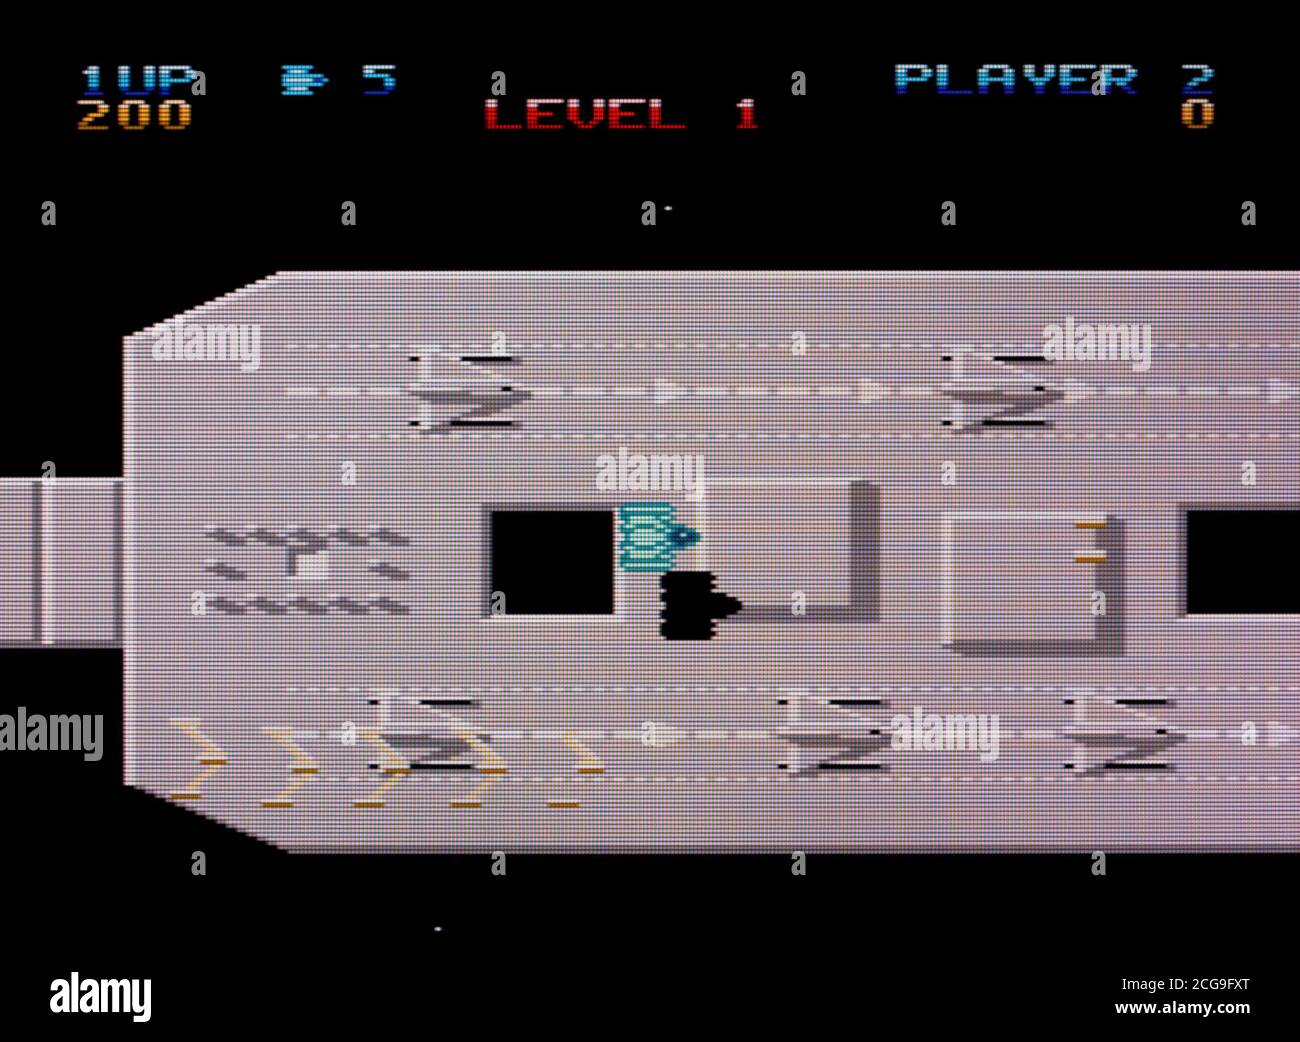 The Last Starfighter - Nintendo Entertainment System - NES Videogame - usage éditorial seulement Banque D'Images